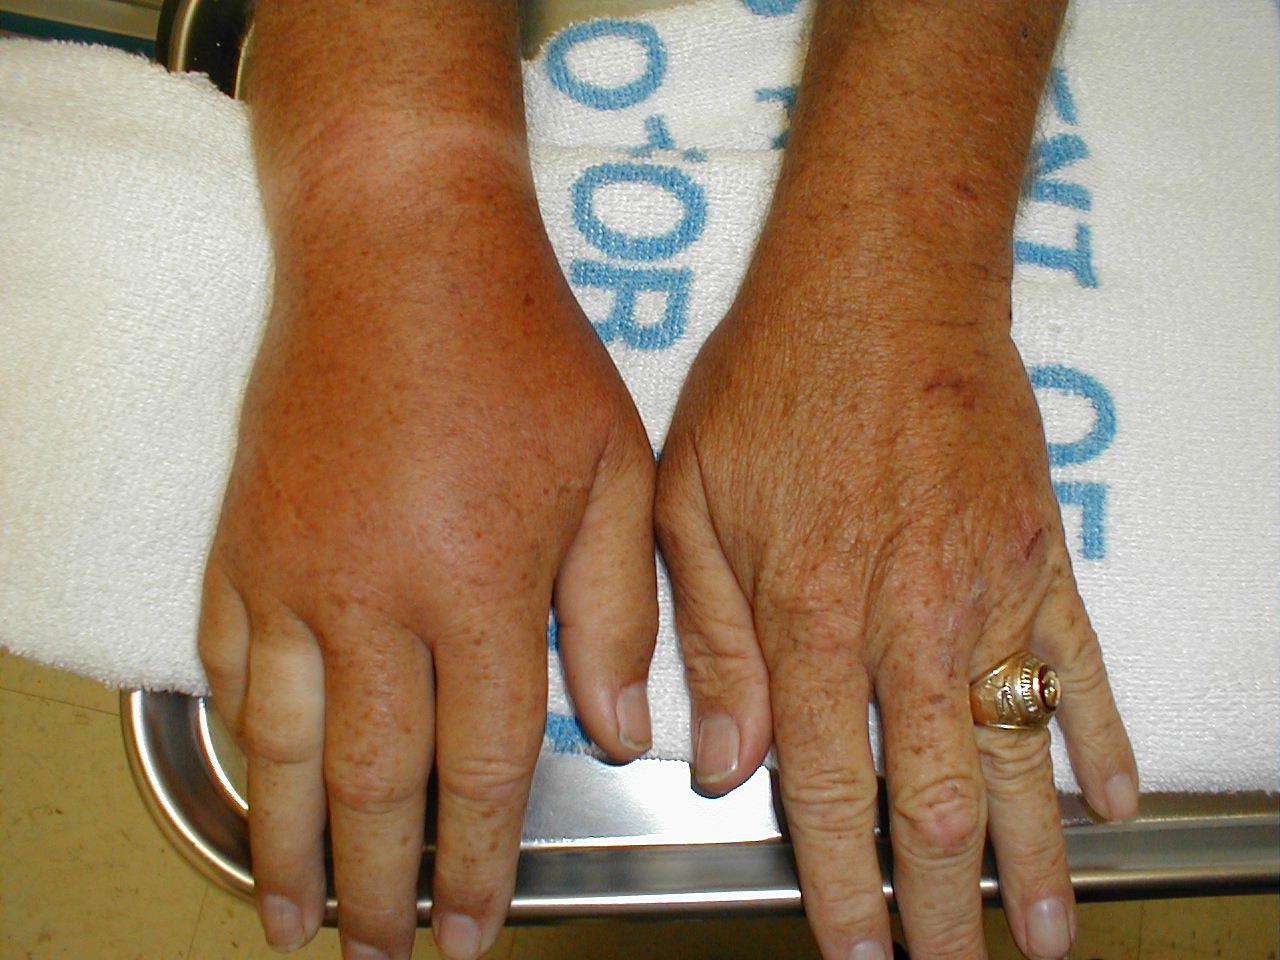 Gout of the Right Wrist: Note swelling and redness over right wrist area. Left wrist is normal.